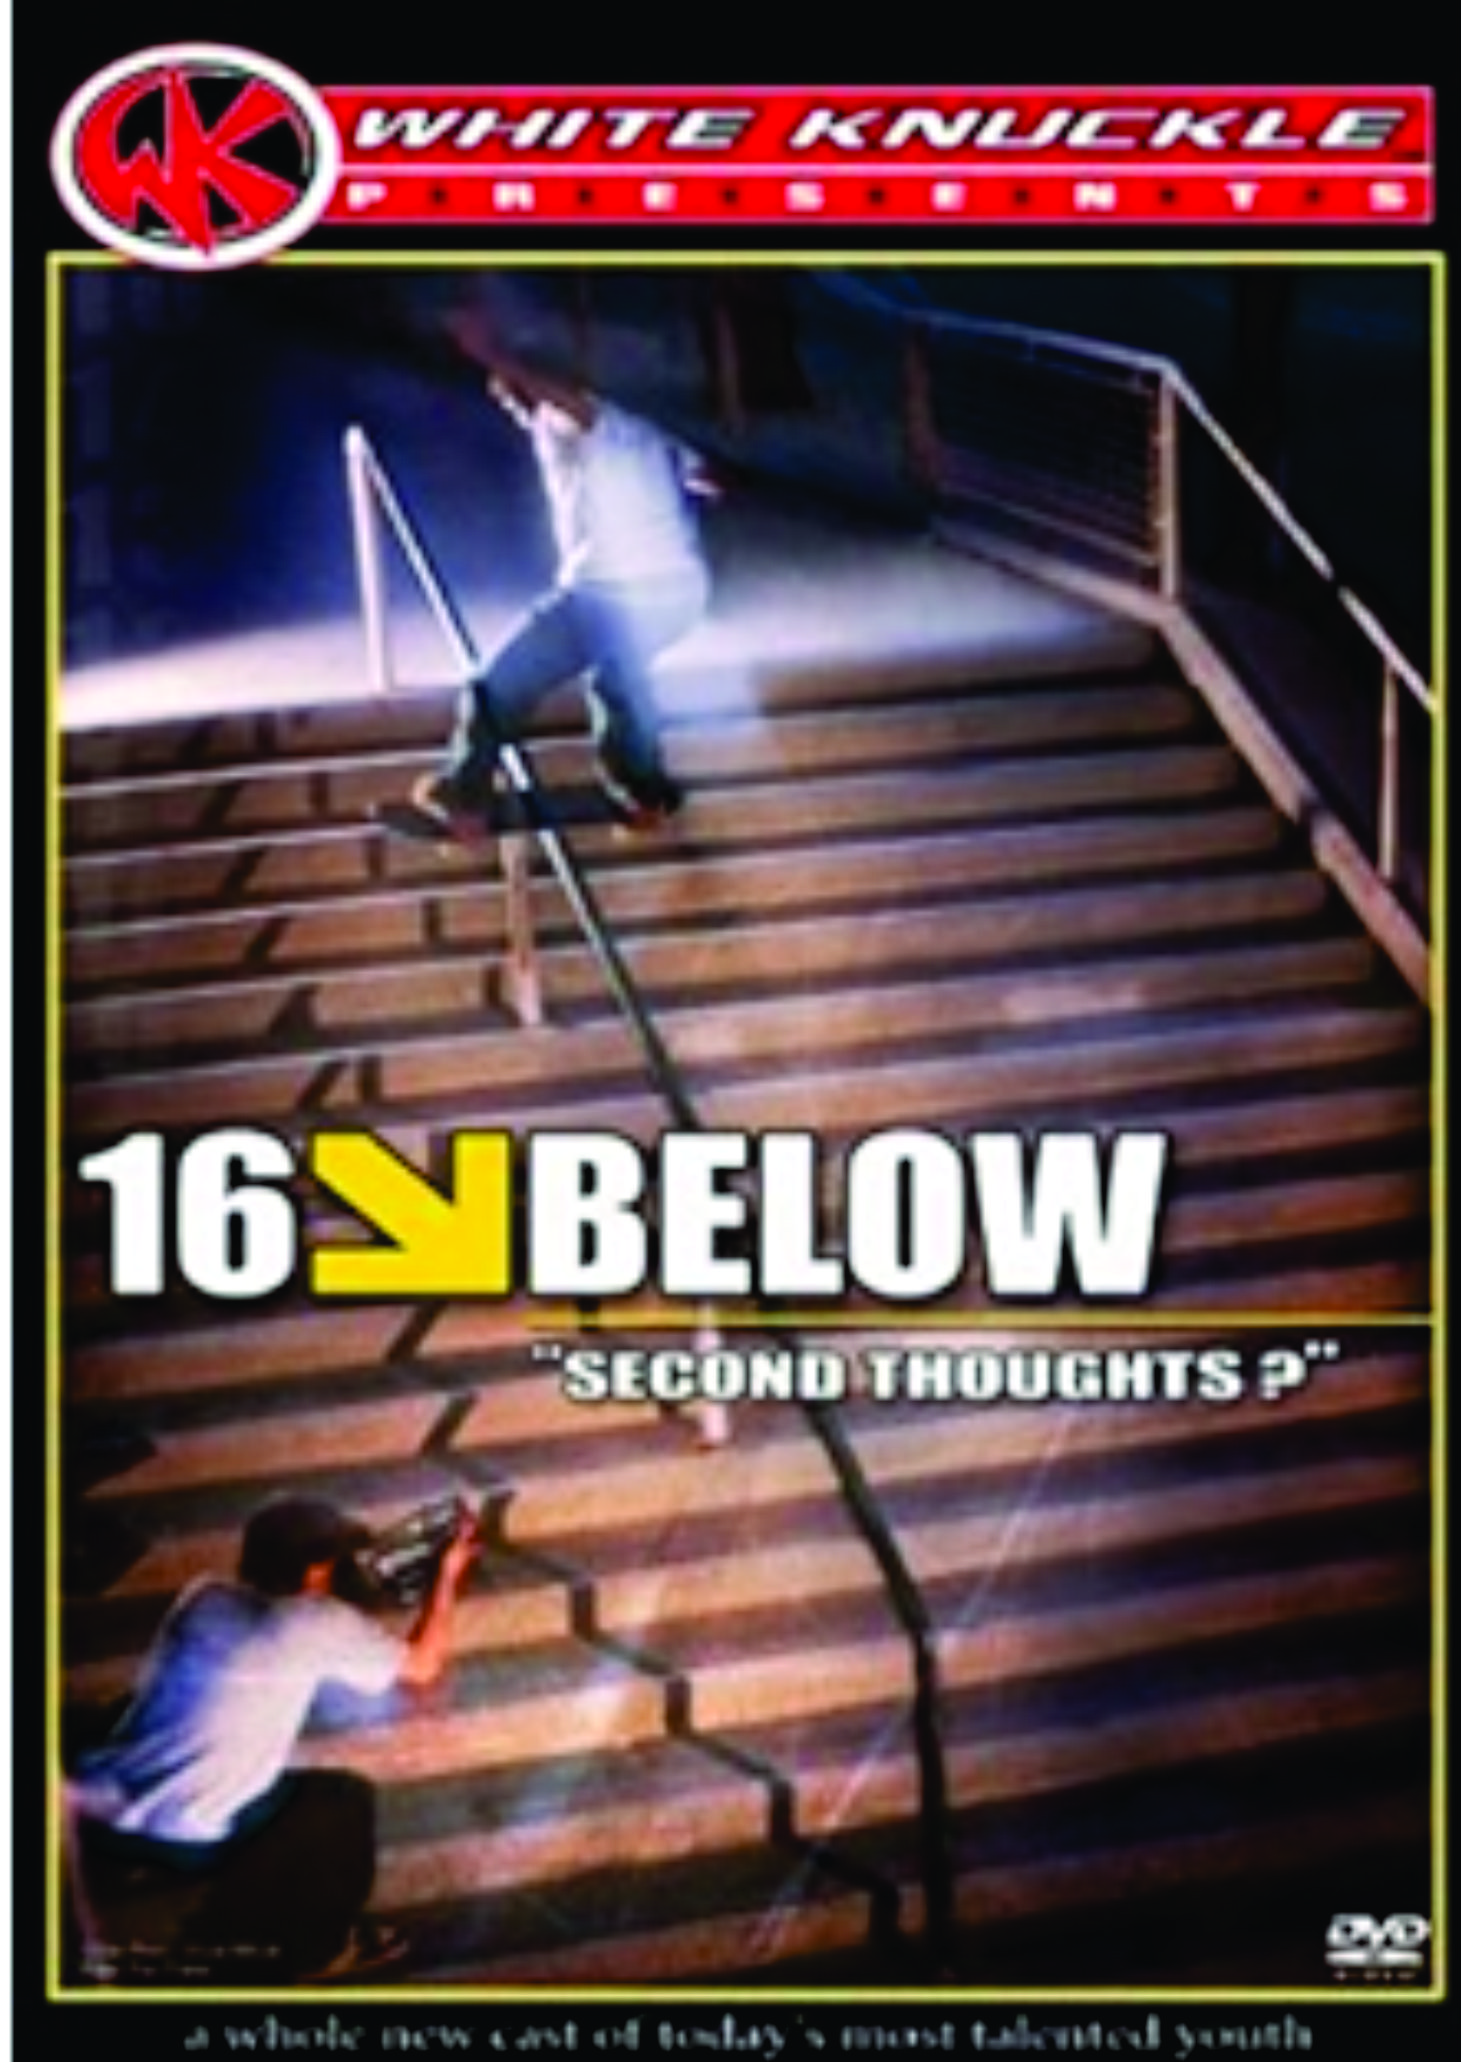 16 Below - Second Thoughts cover art